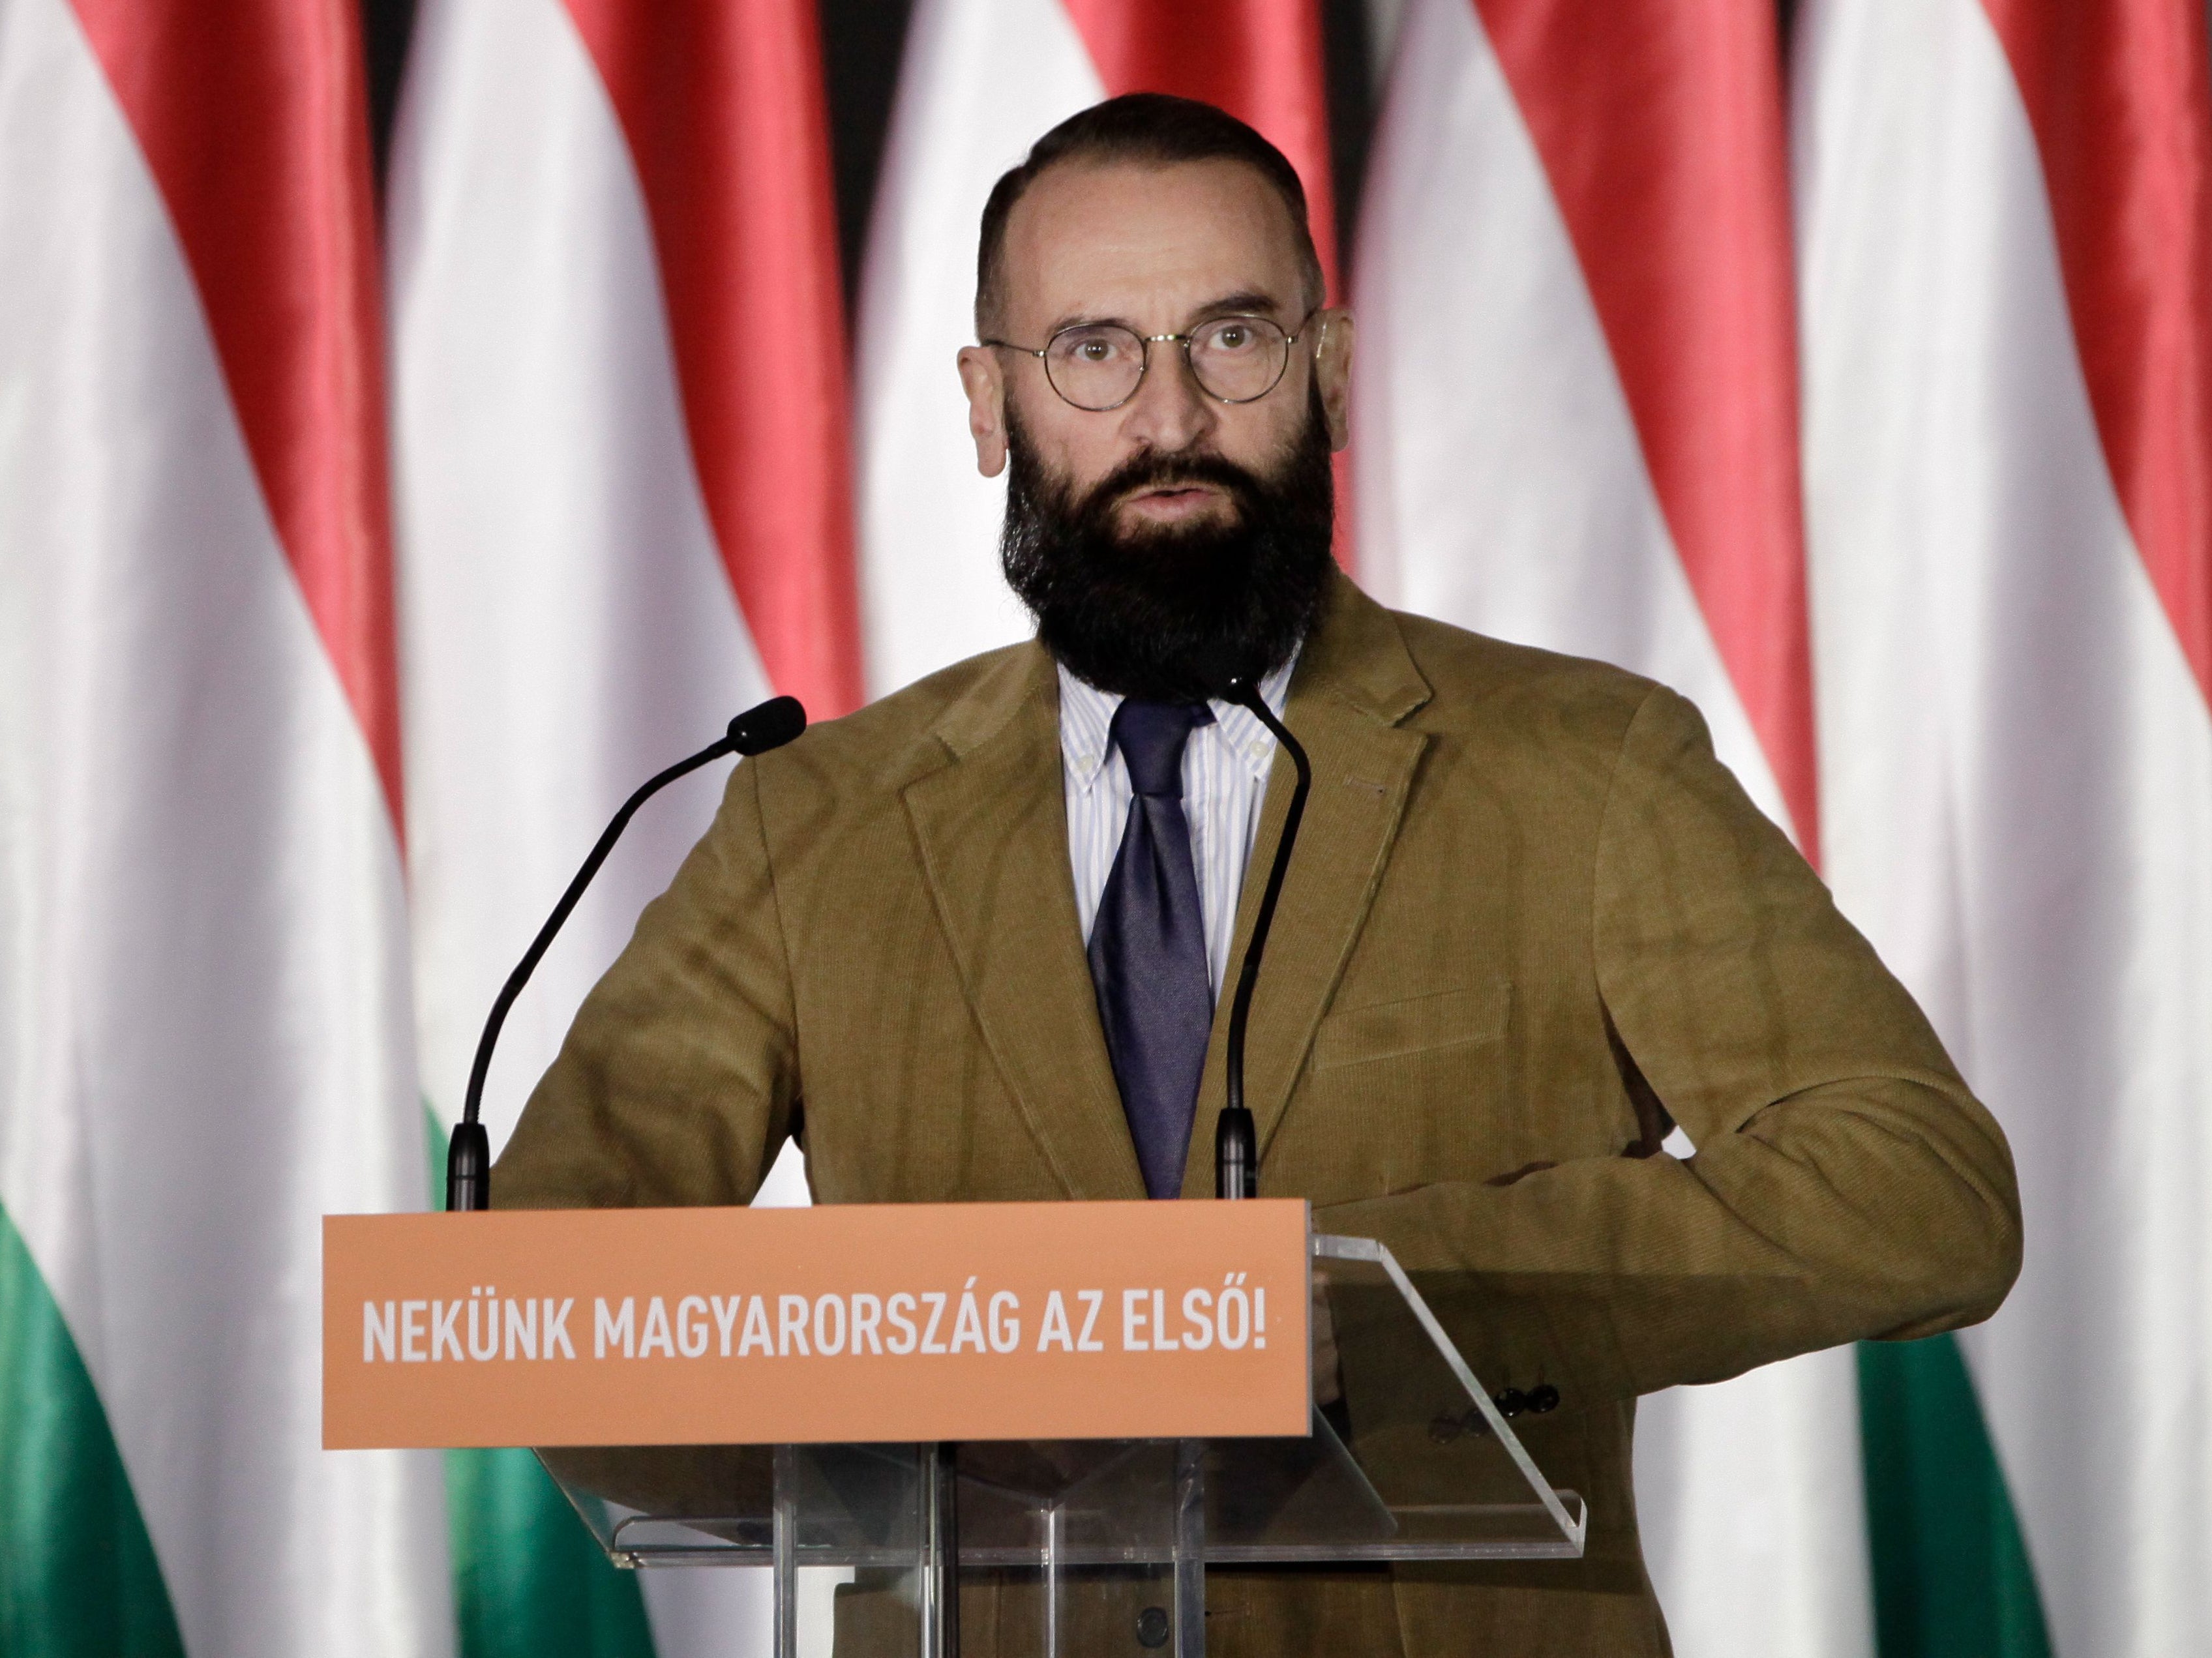 Mr Szajer resigned from the far-right ruling Fidesz party in December 2020 after he was arrested by police for breaking coronavirus restrictions by attending a sex party